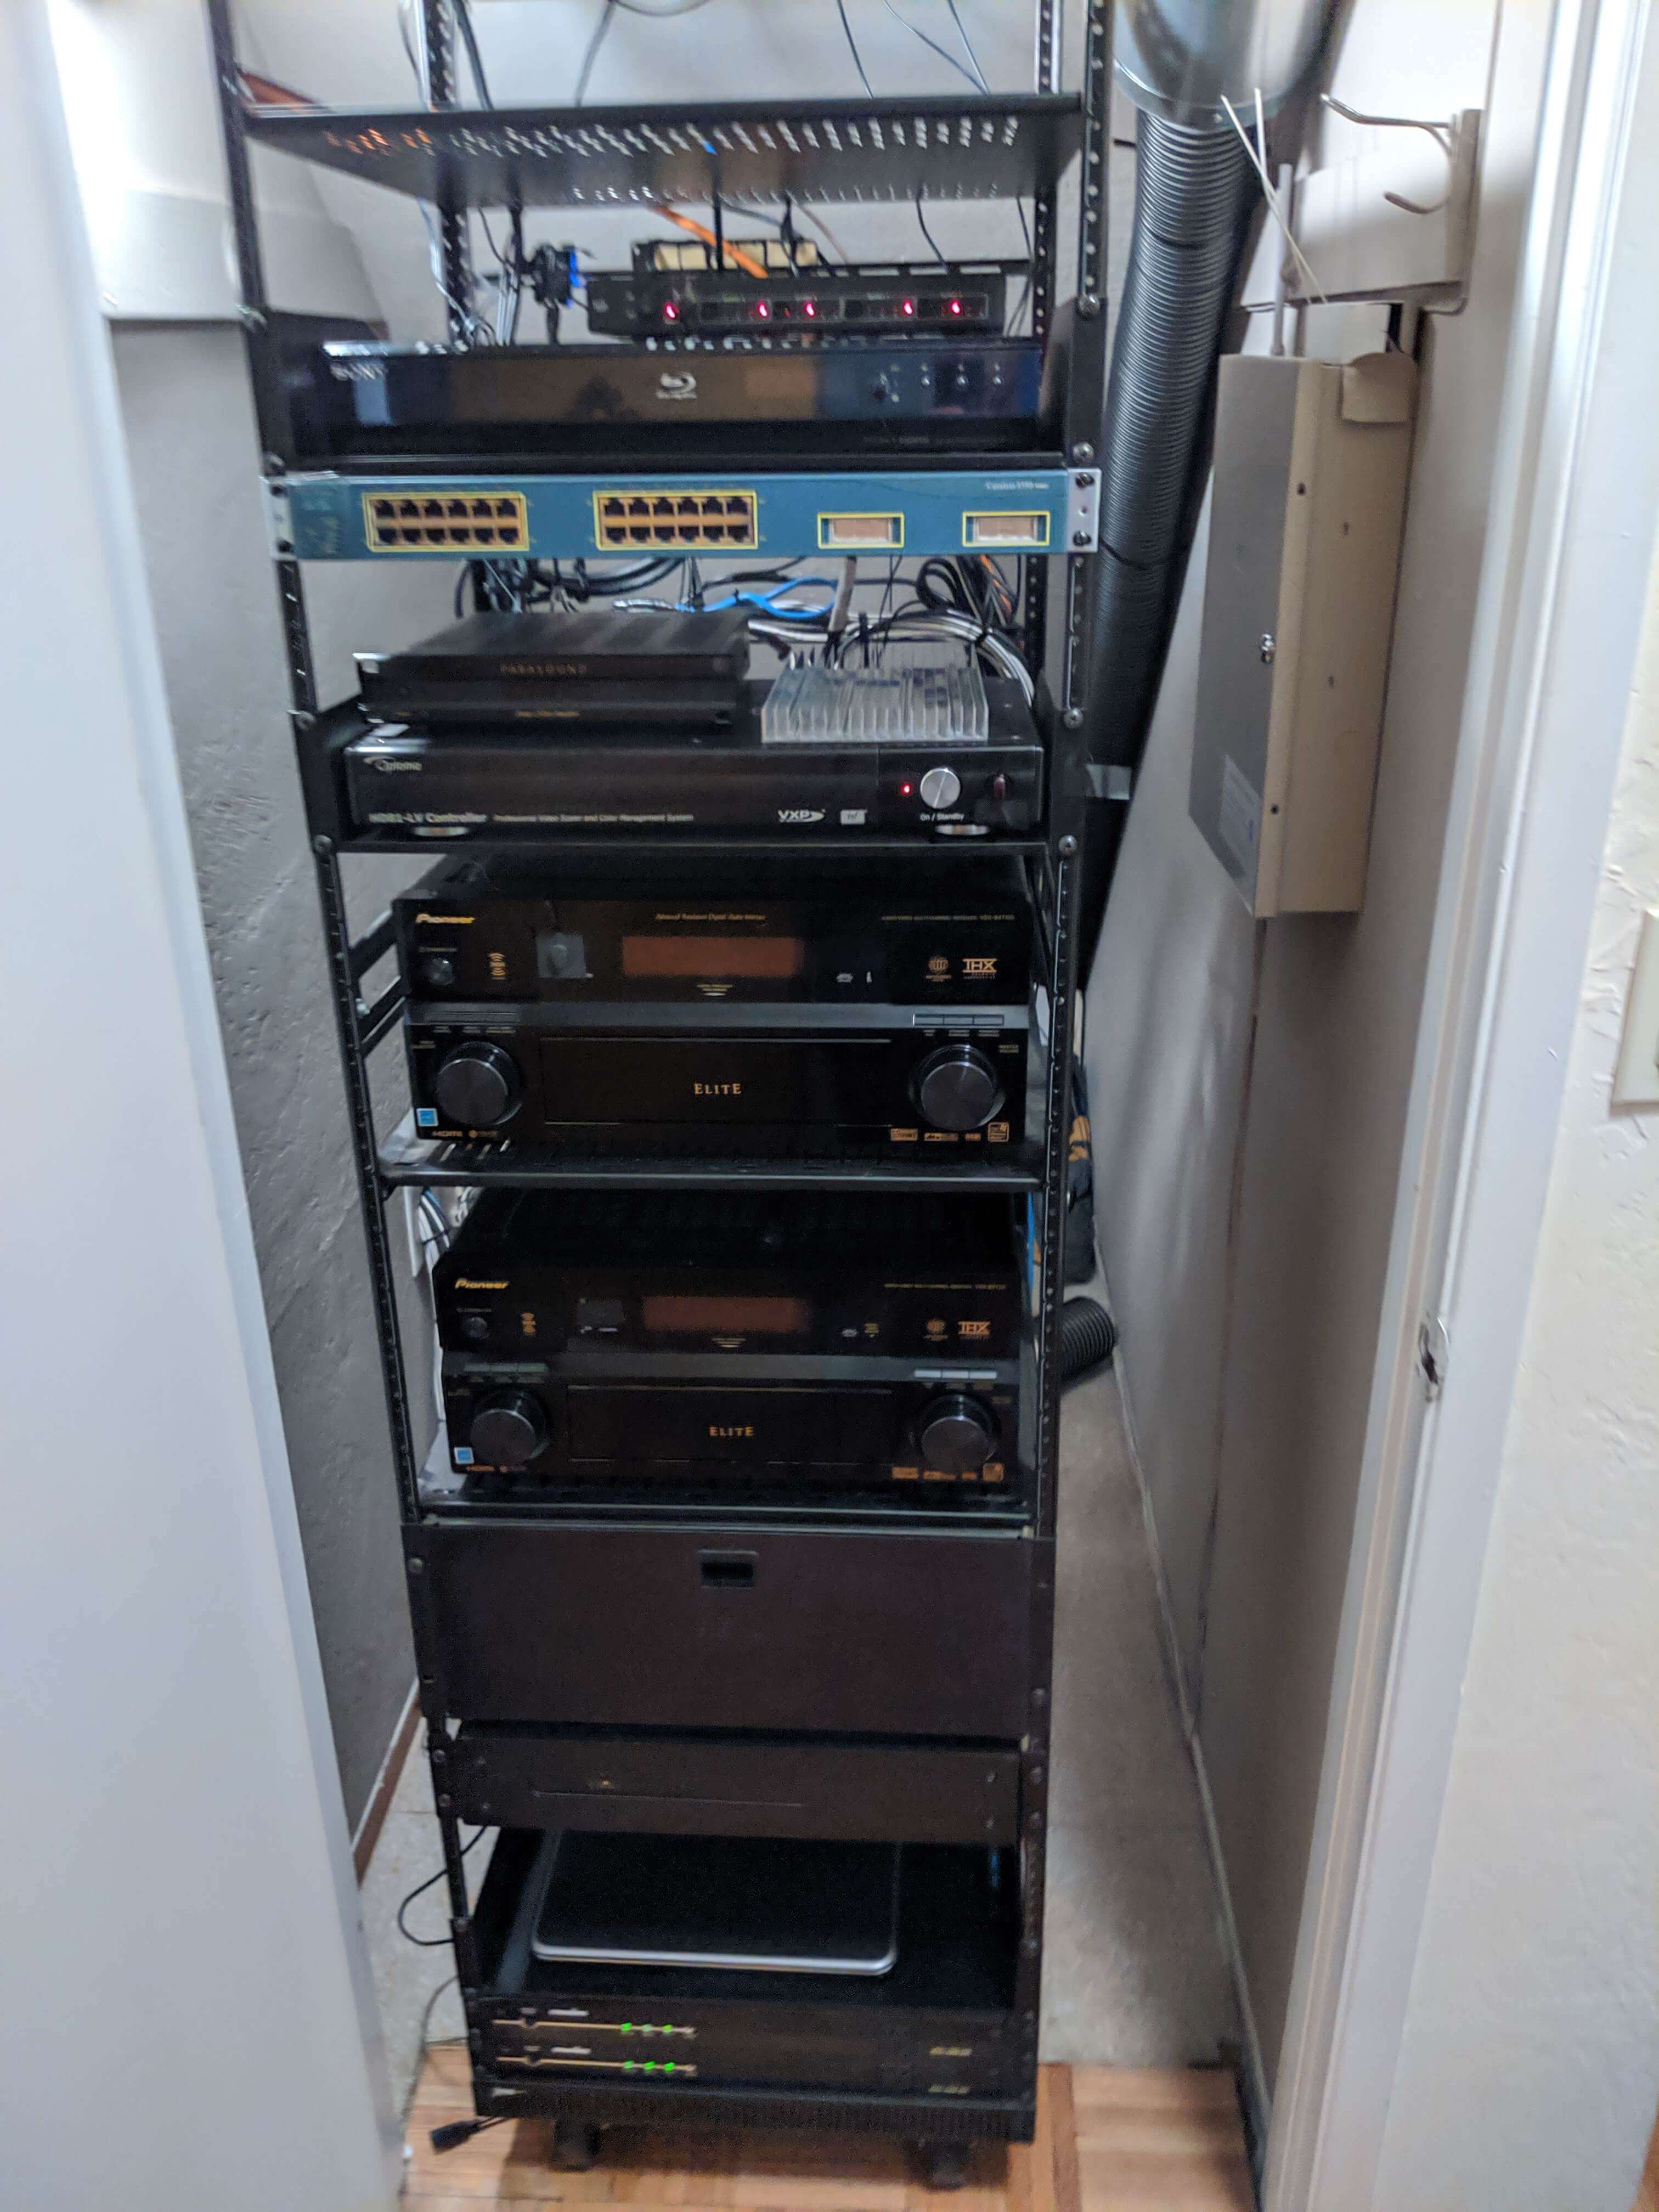 Image of the front of the rack